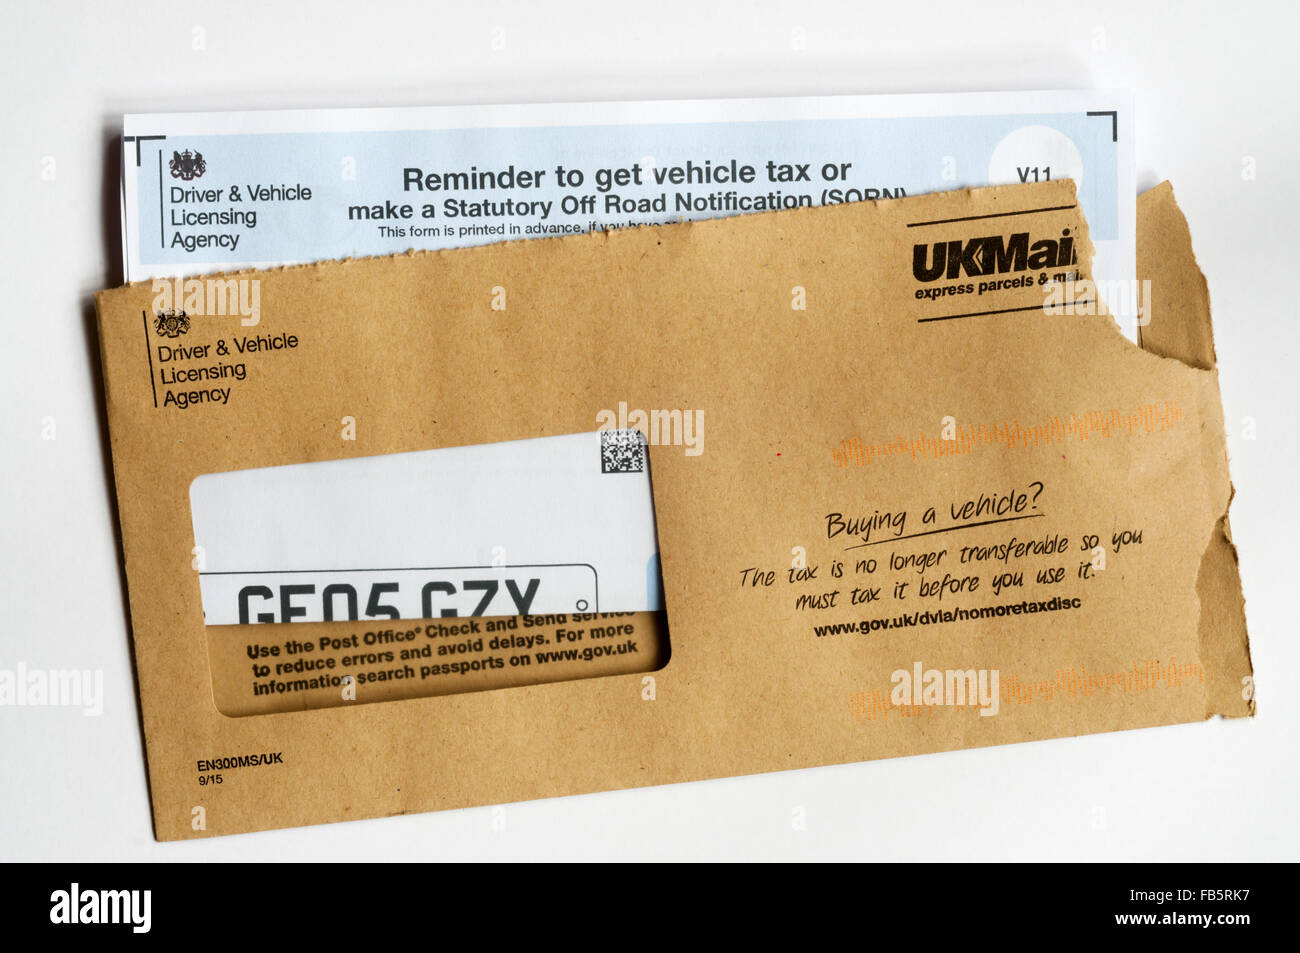 A Vehicle Tax reminder from the DVLA. Stock Photo